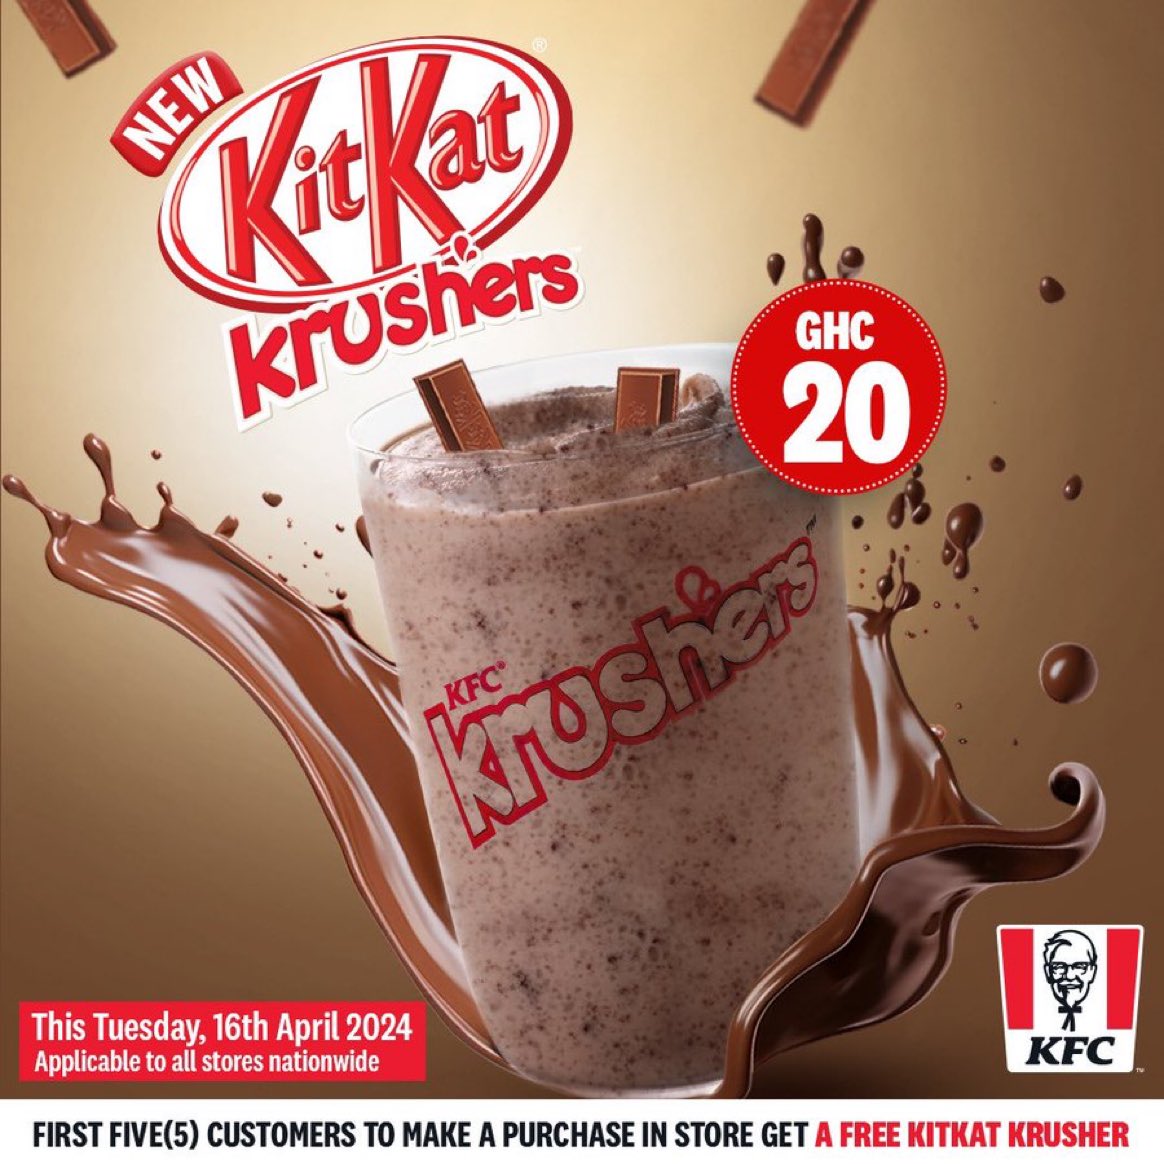 I want you to know that KFC is giving the first five customers a 𝐅𝐫𝐞𝐞 𝐊𝐢𝐭𝐤𝐚𝐭 𝐊𝐫𝐮𝐬𝐡𝐞𝐫 with any purchase. #KFCKitKatKrusher

Enjoy huge taste, robust flavour, and coolness now at every KFC store across the country.